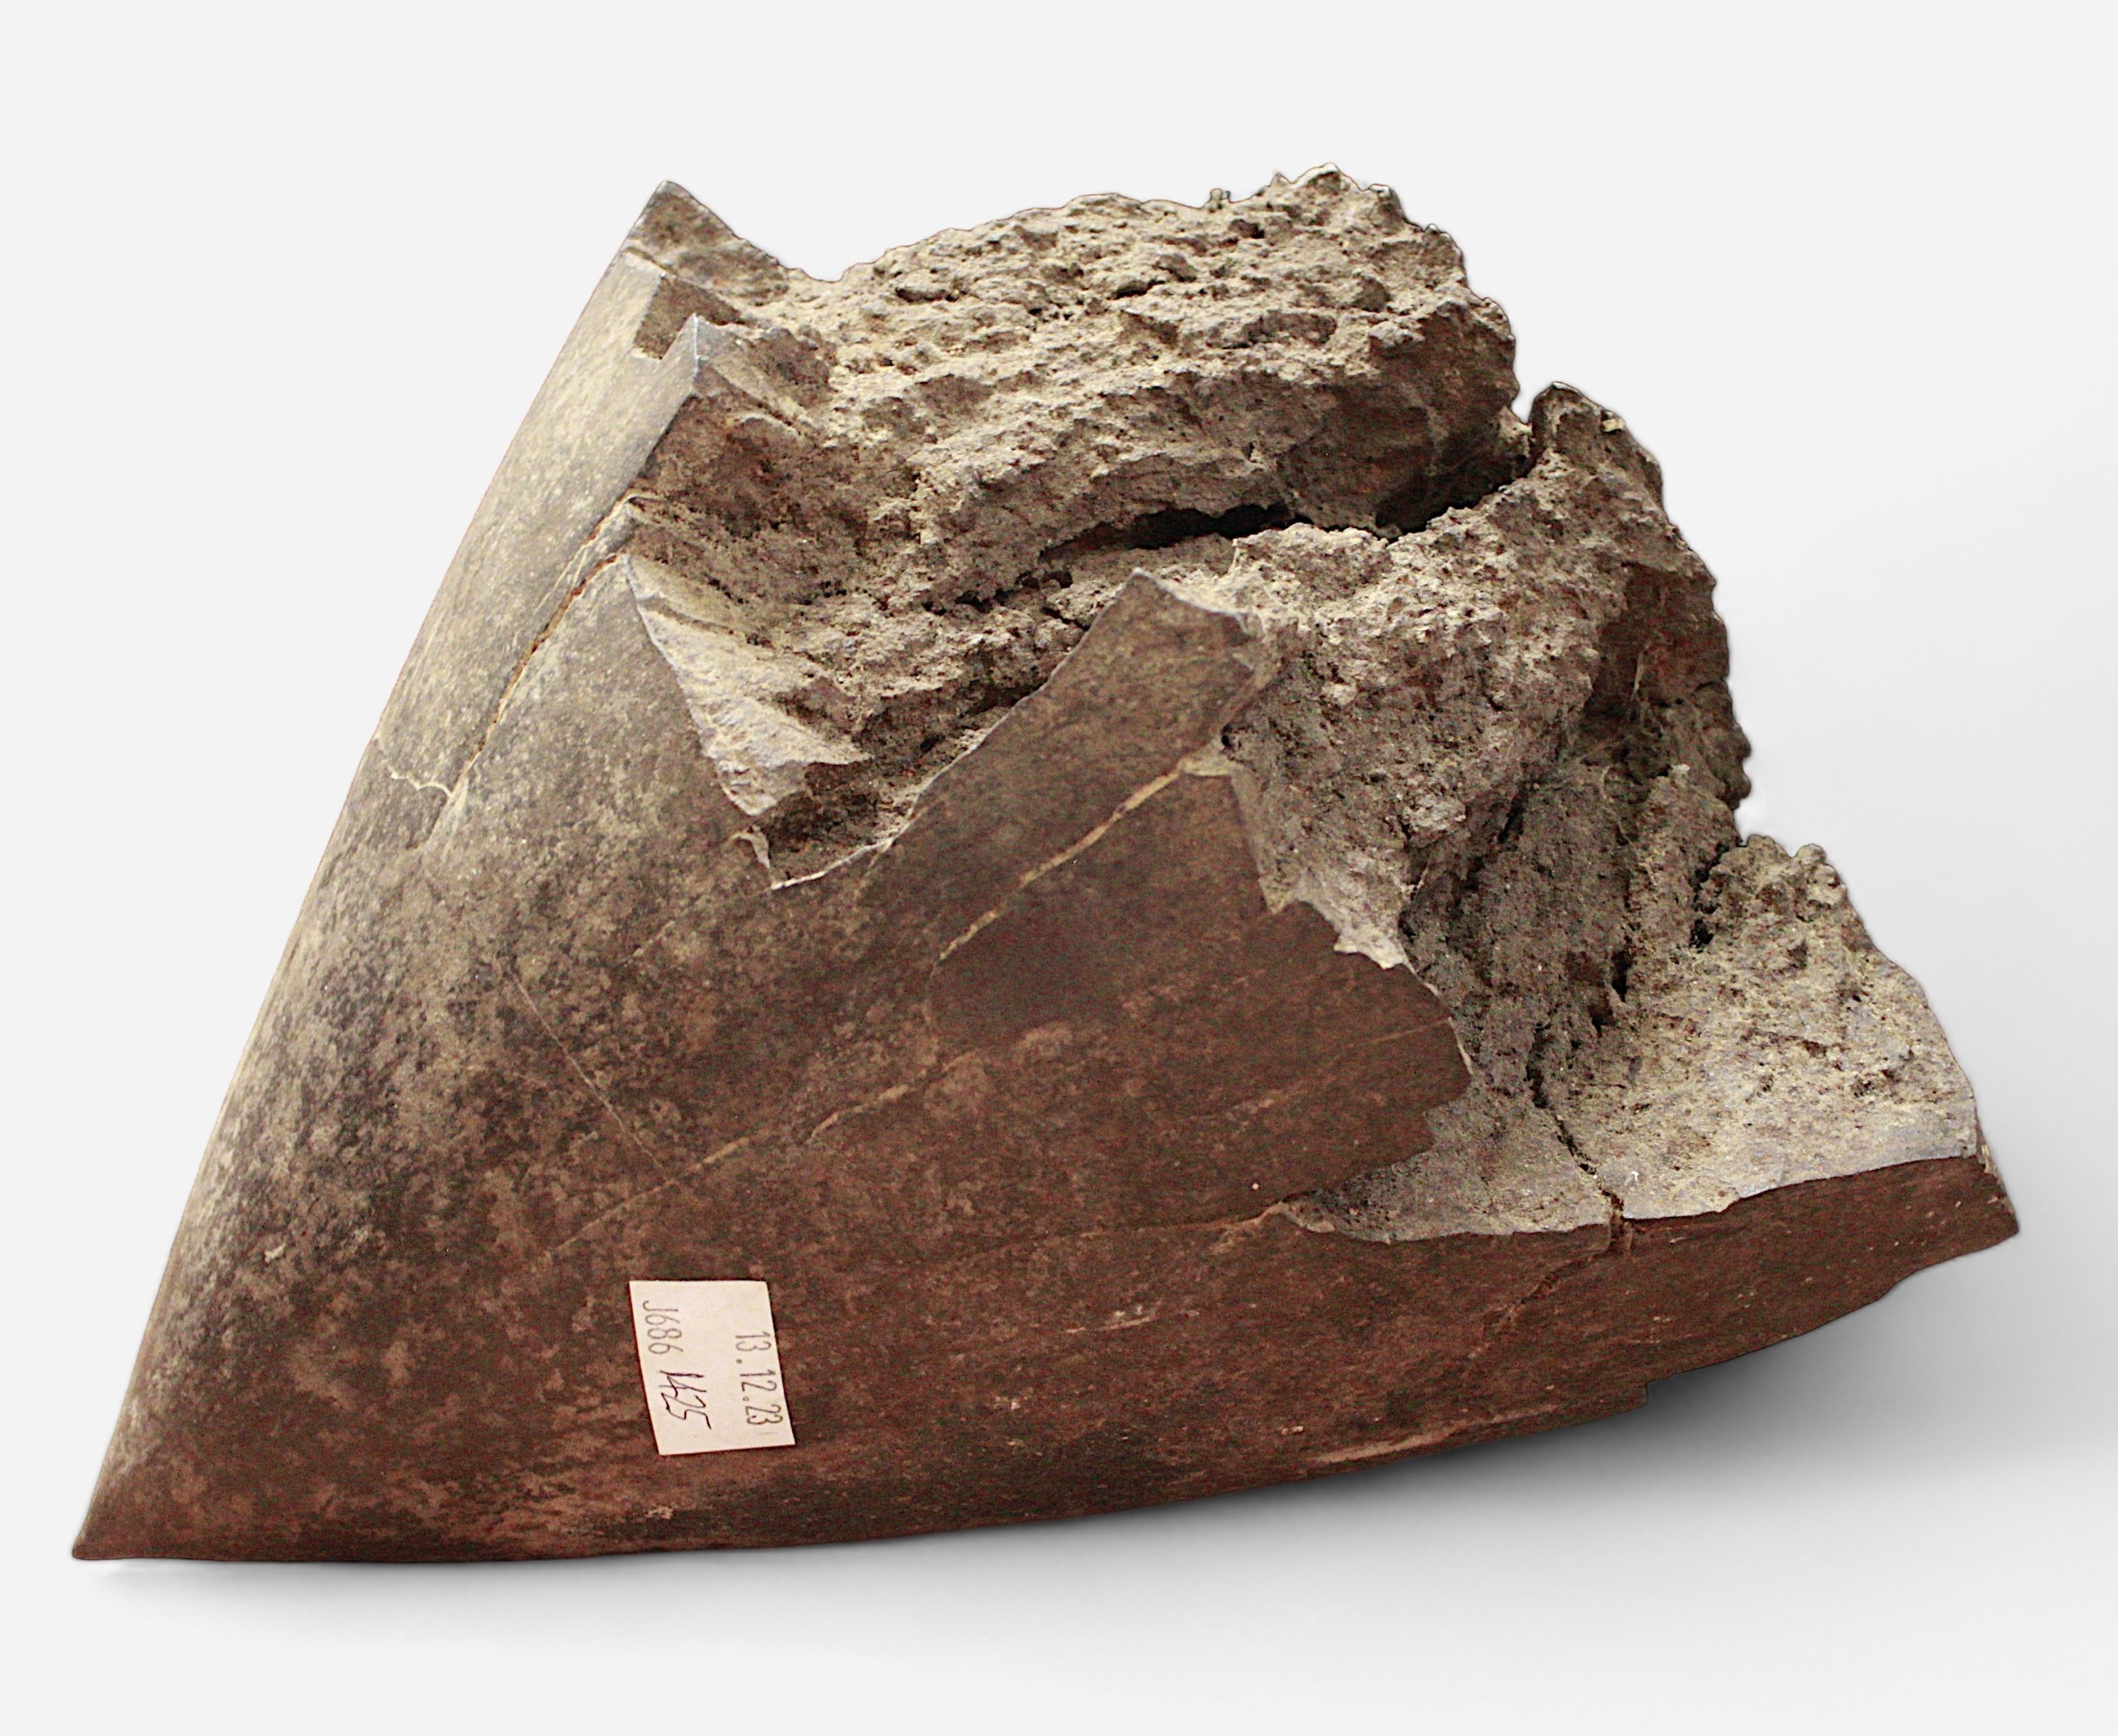 A very large and heavy fragment from the nose of an exploded bomb, probably WWII period, approx. - Bild 2 aus 2